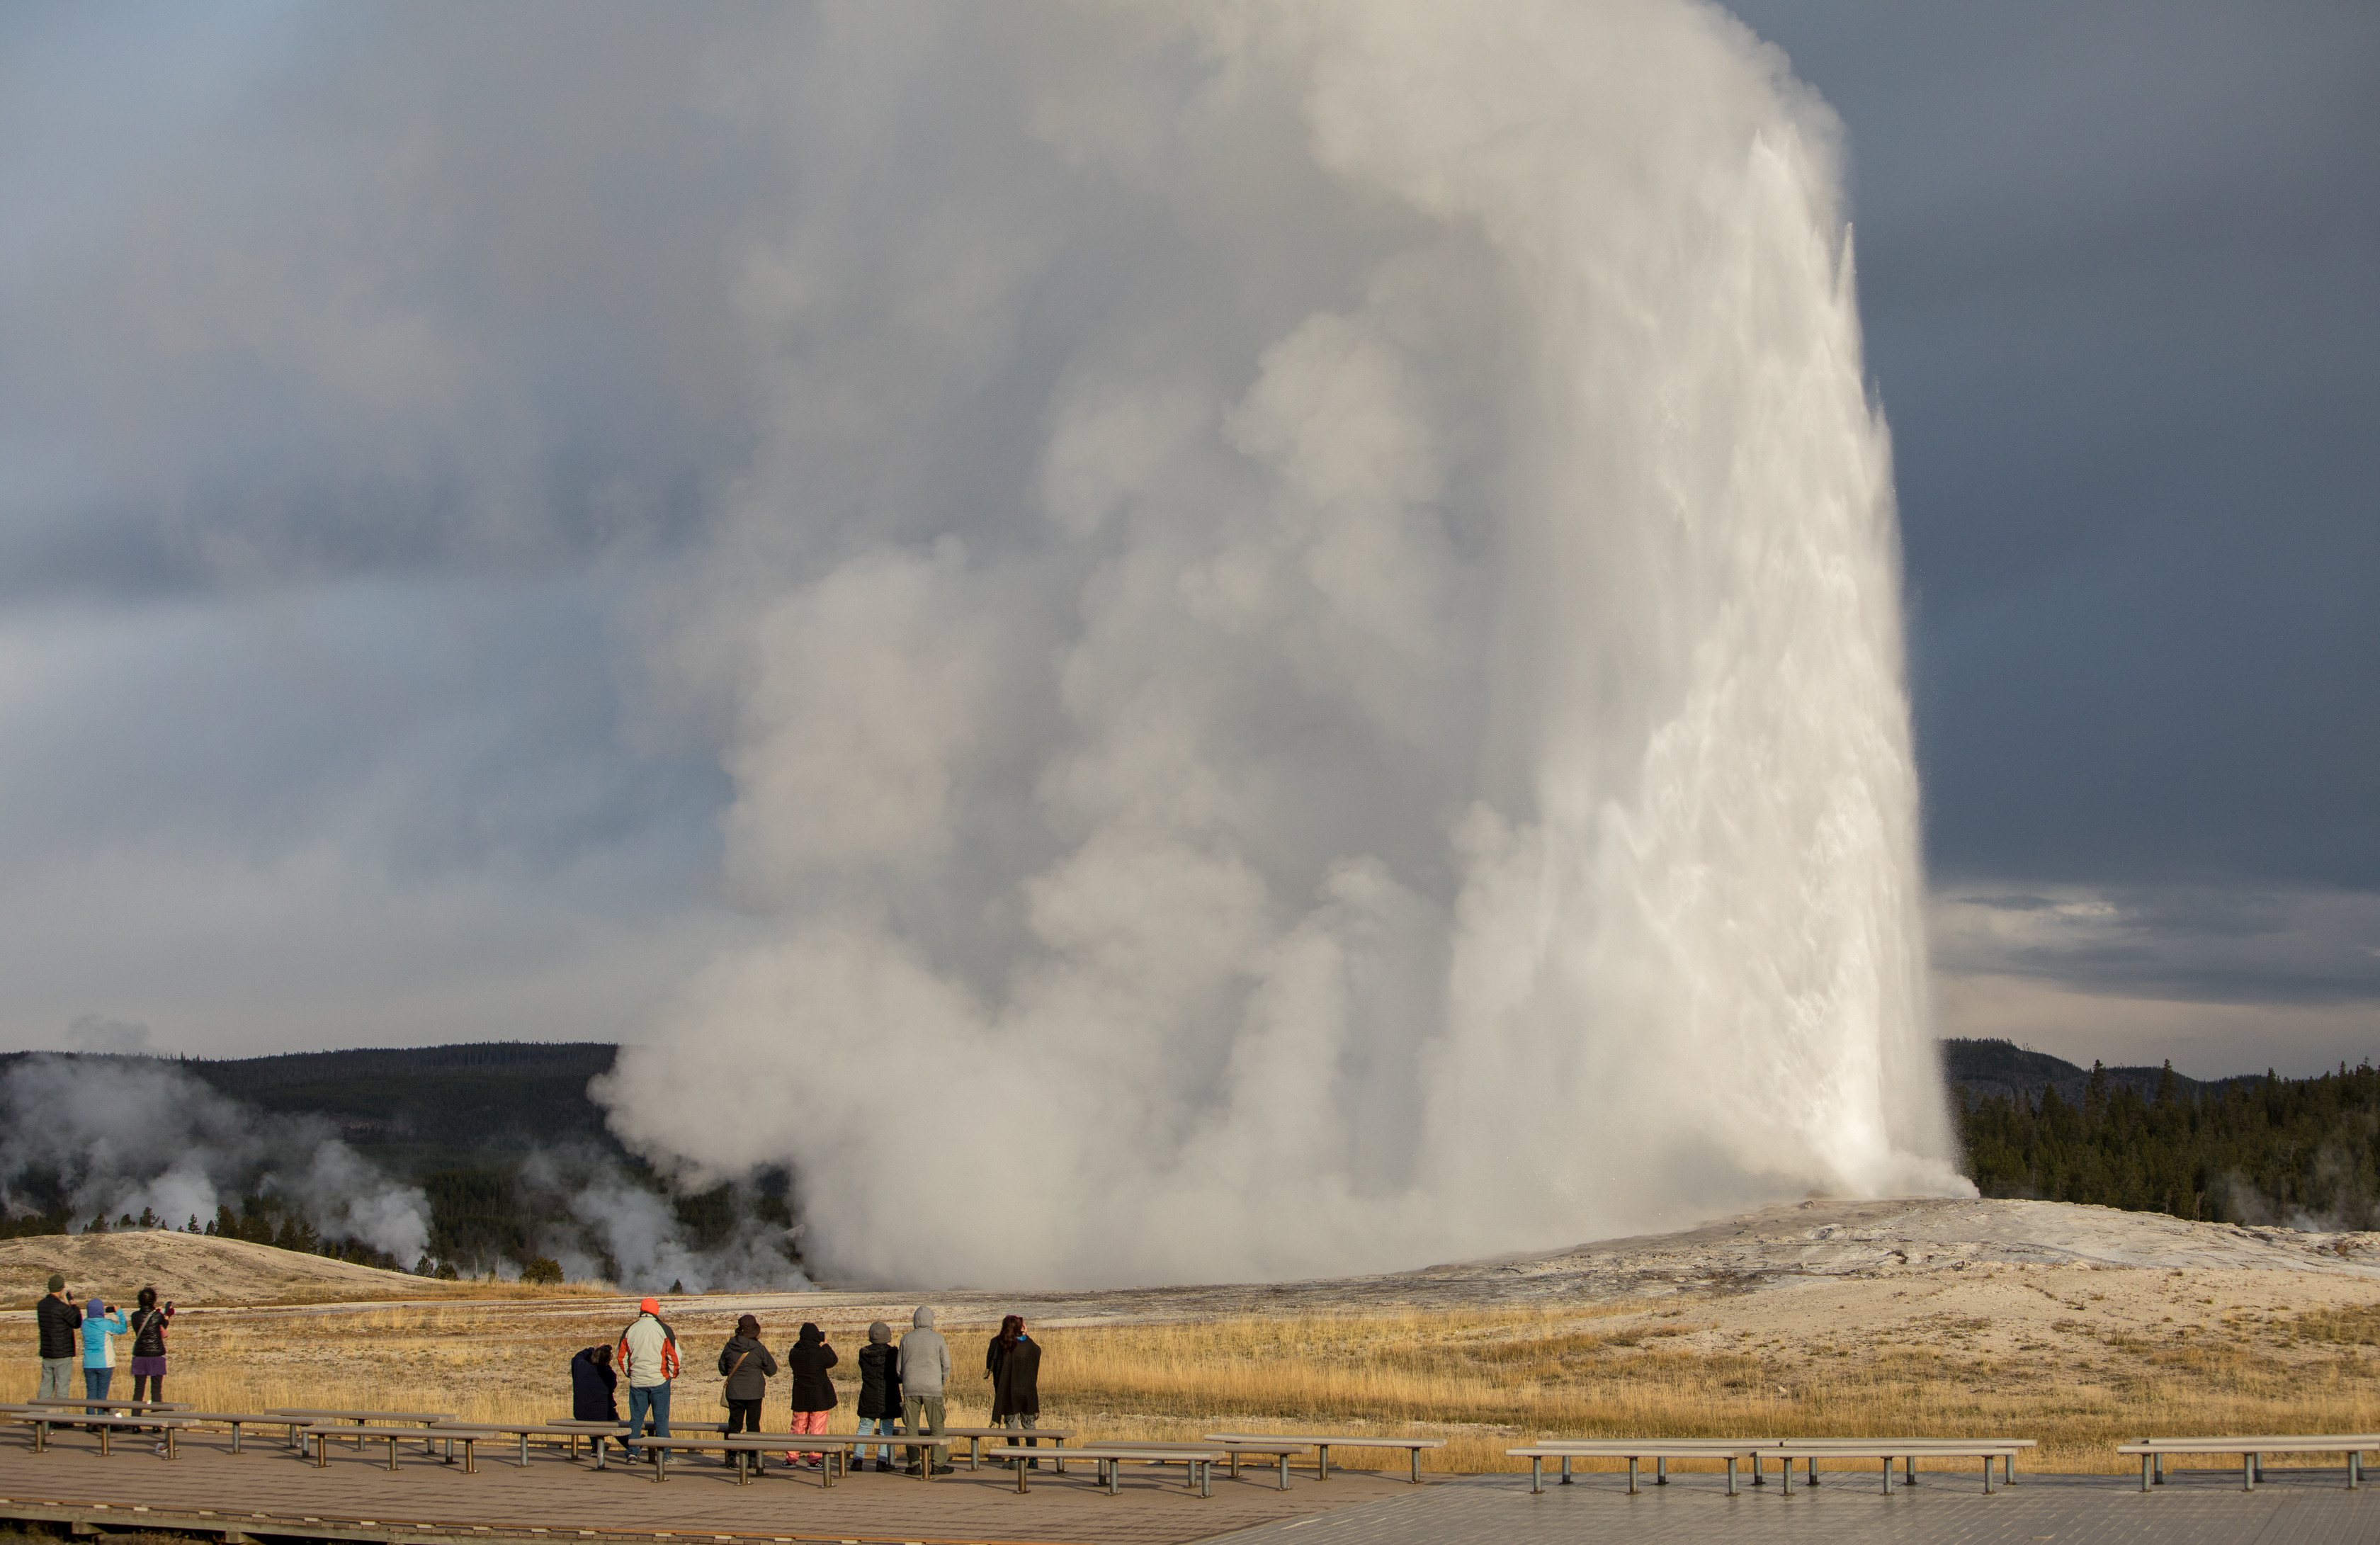 A geyser eruption with visitors standing on the boardwalk watching.